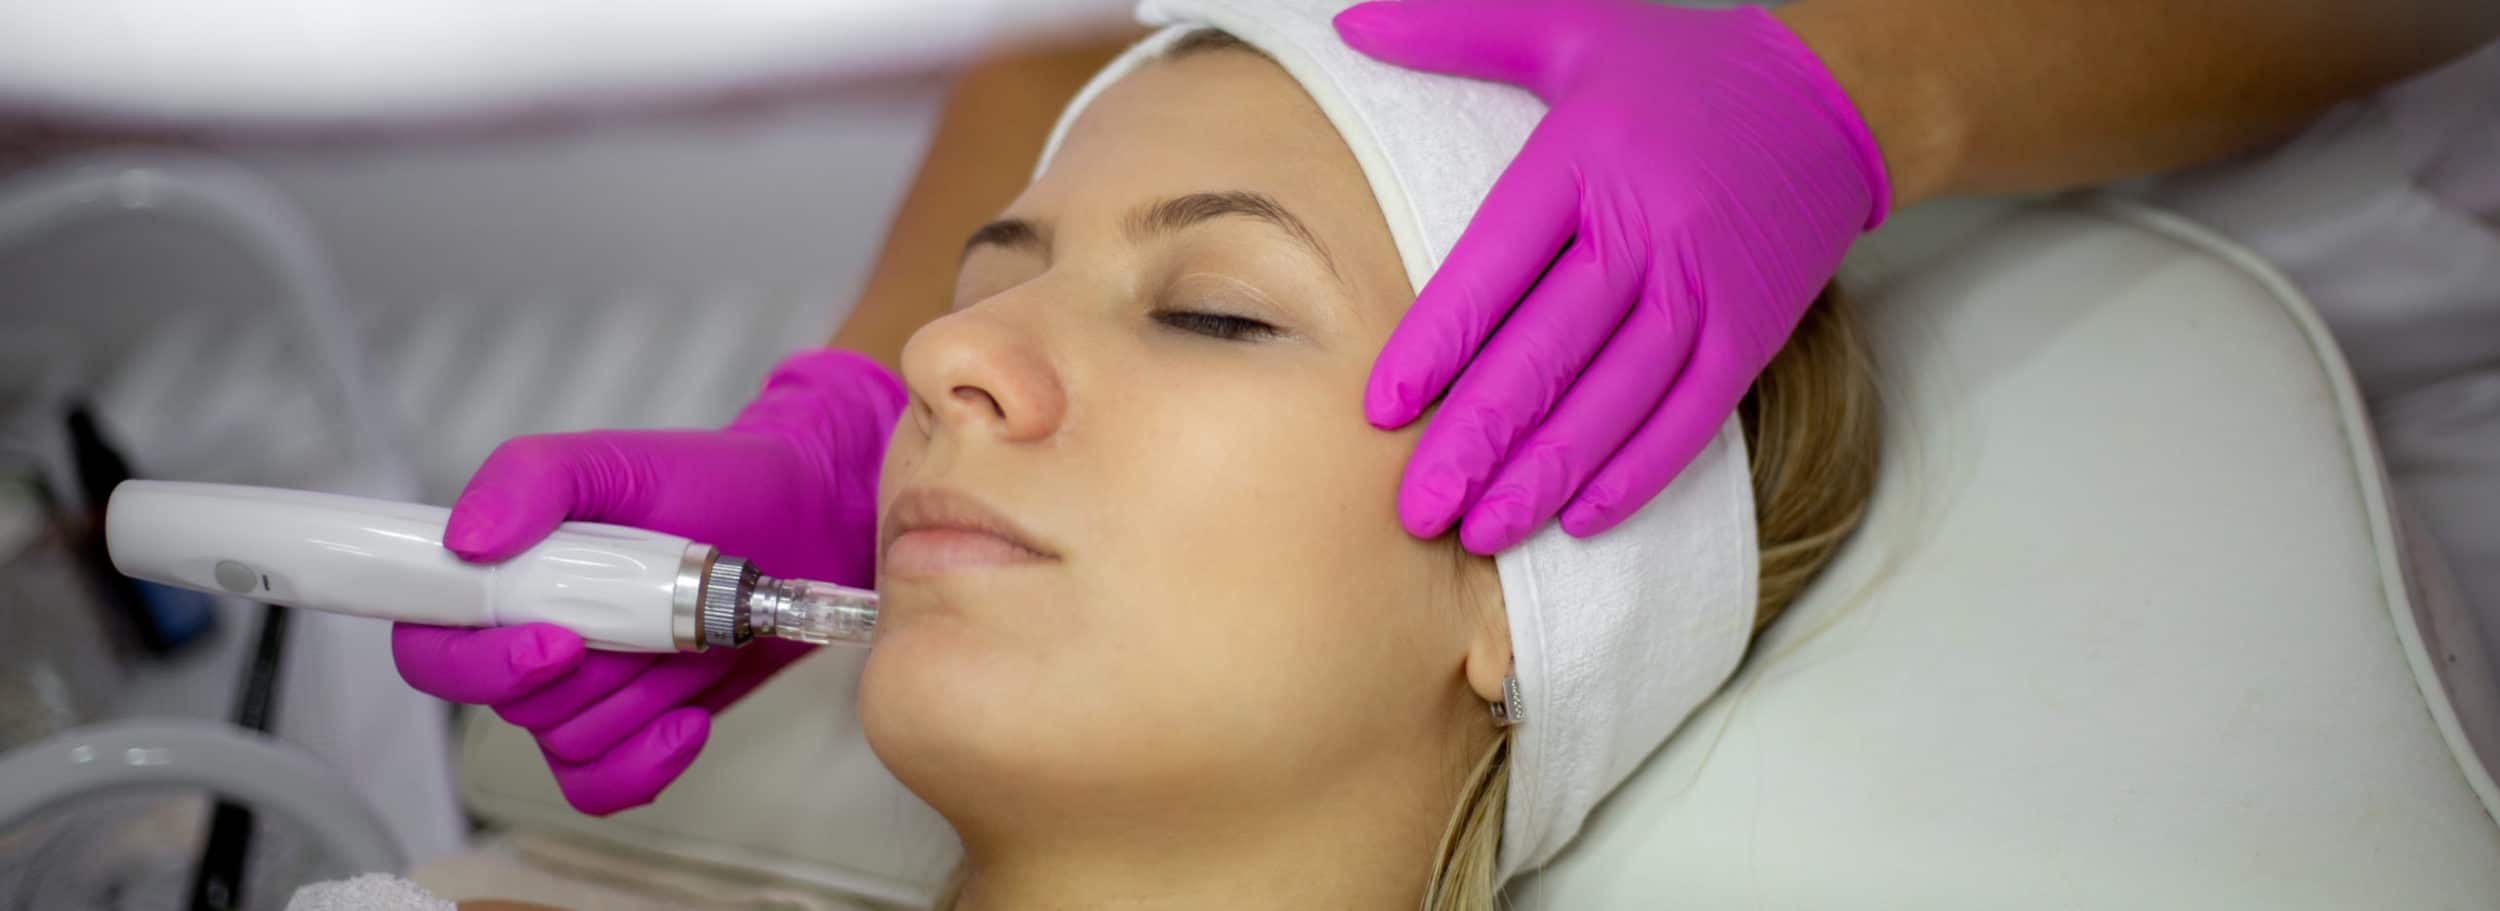 Close up image of a woman getting a microneedling treatment in Boca Raton, FL